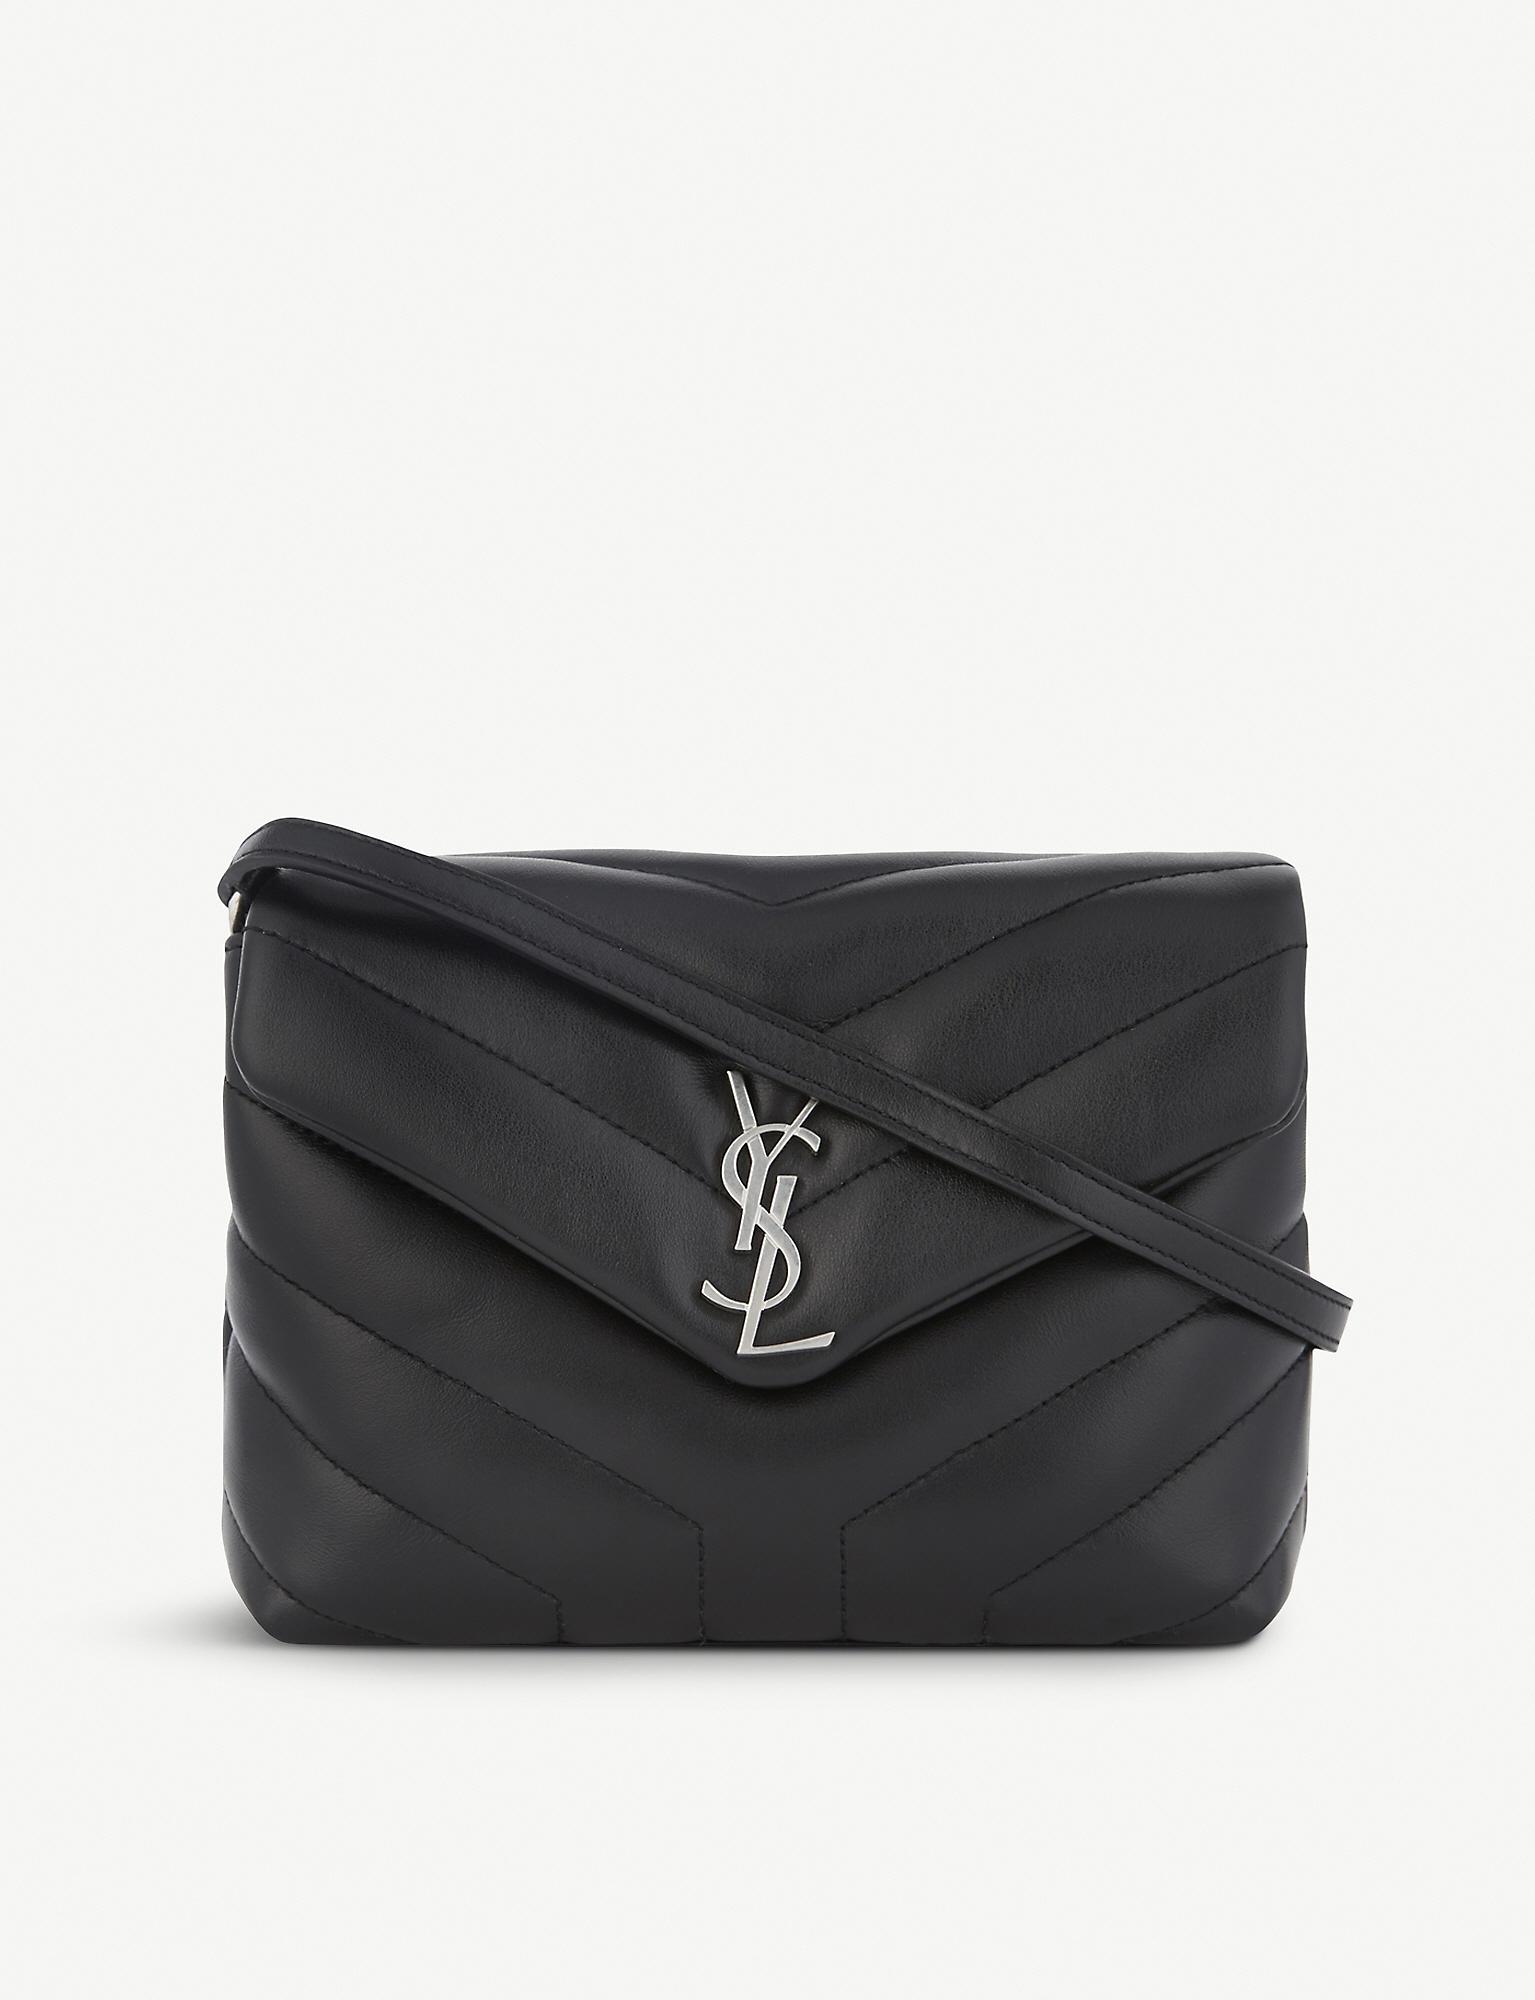 Saint Laurent Monogram Lou Lou Quilted Leather Cross-body Bag in Black - Lyst